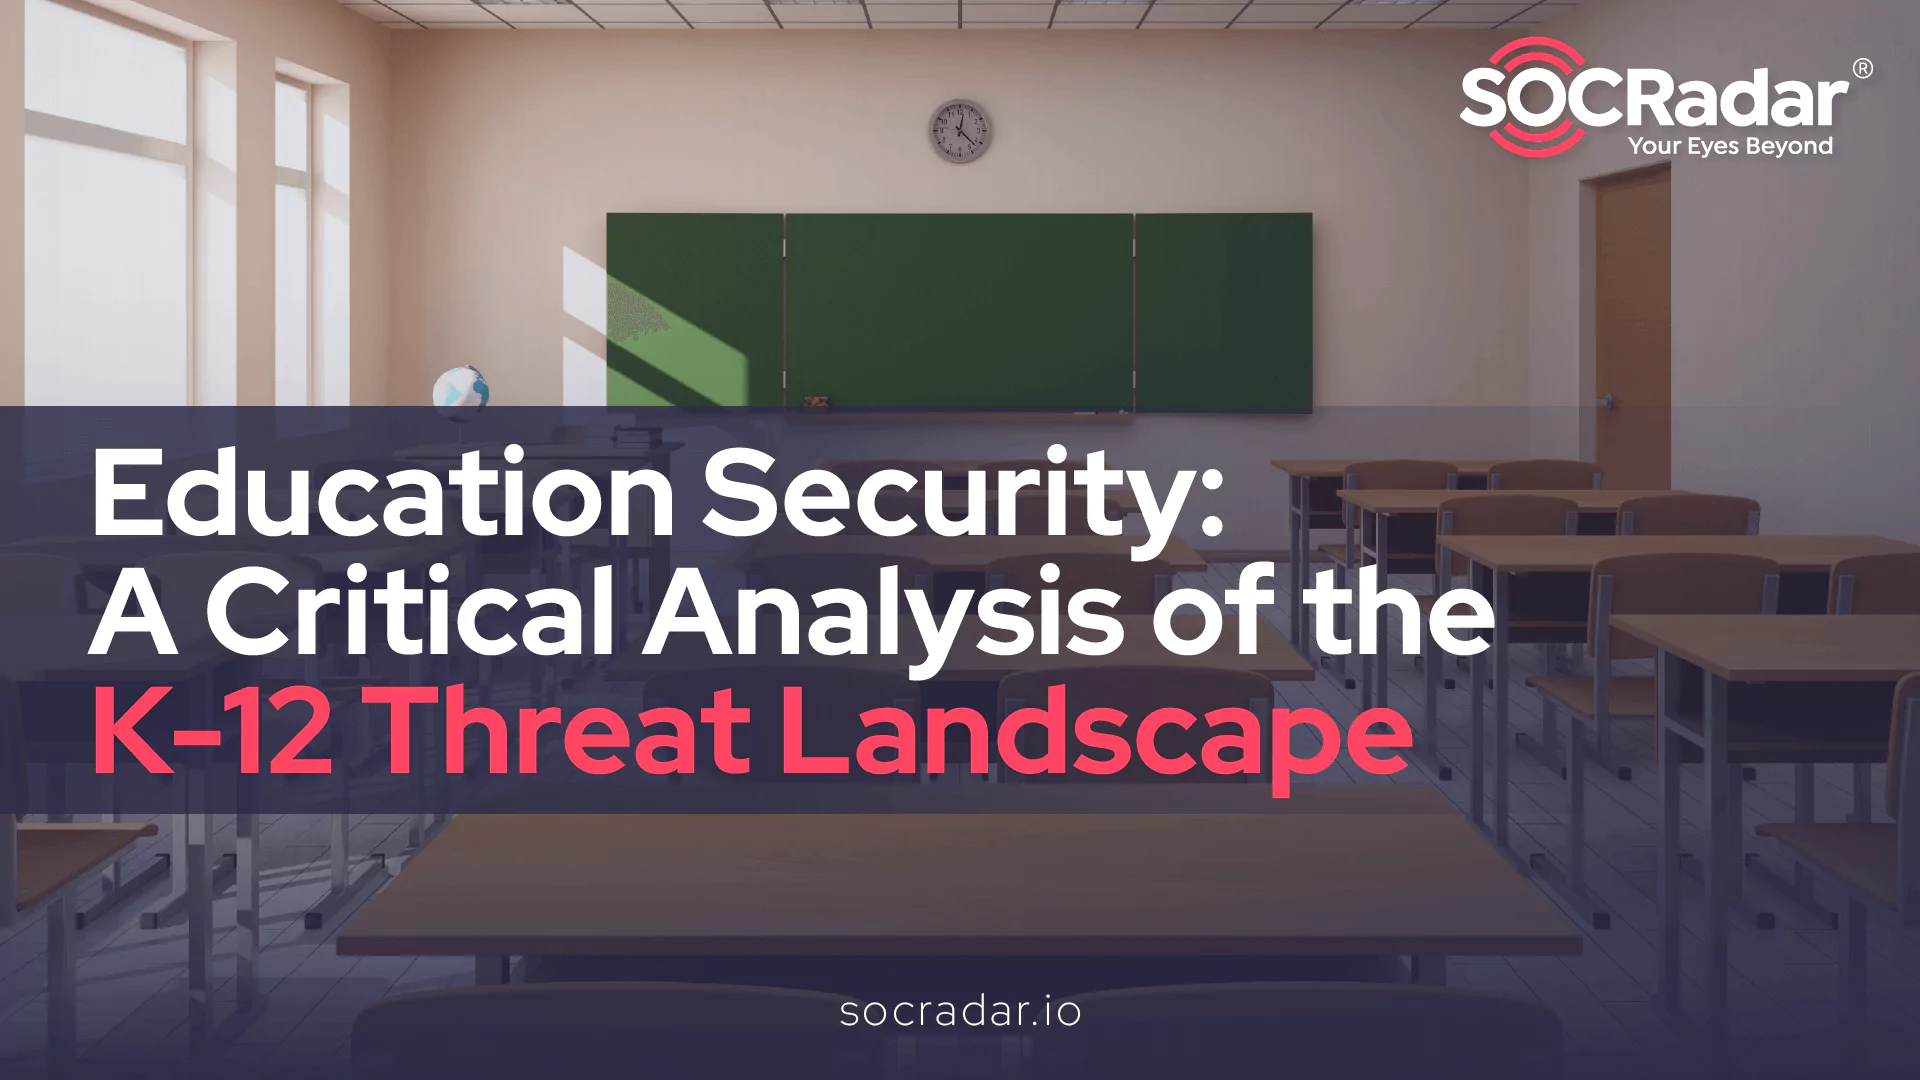 SOCRadar® Cyber Intelligence Inc. | Education Security: A Critical Analysis of the K-12 Threat Landscape